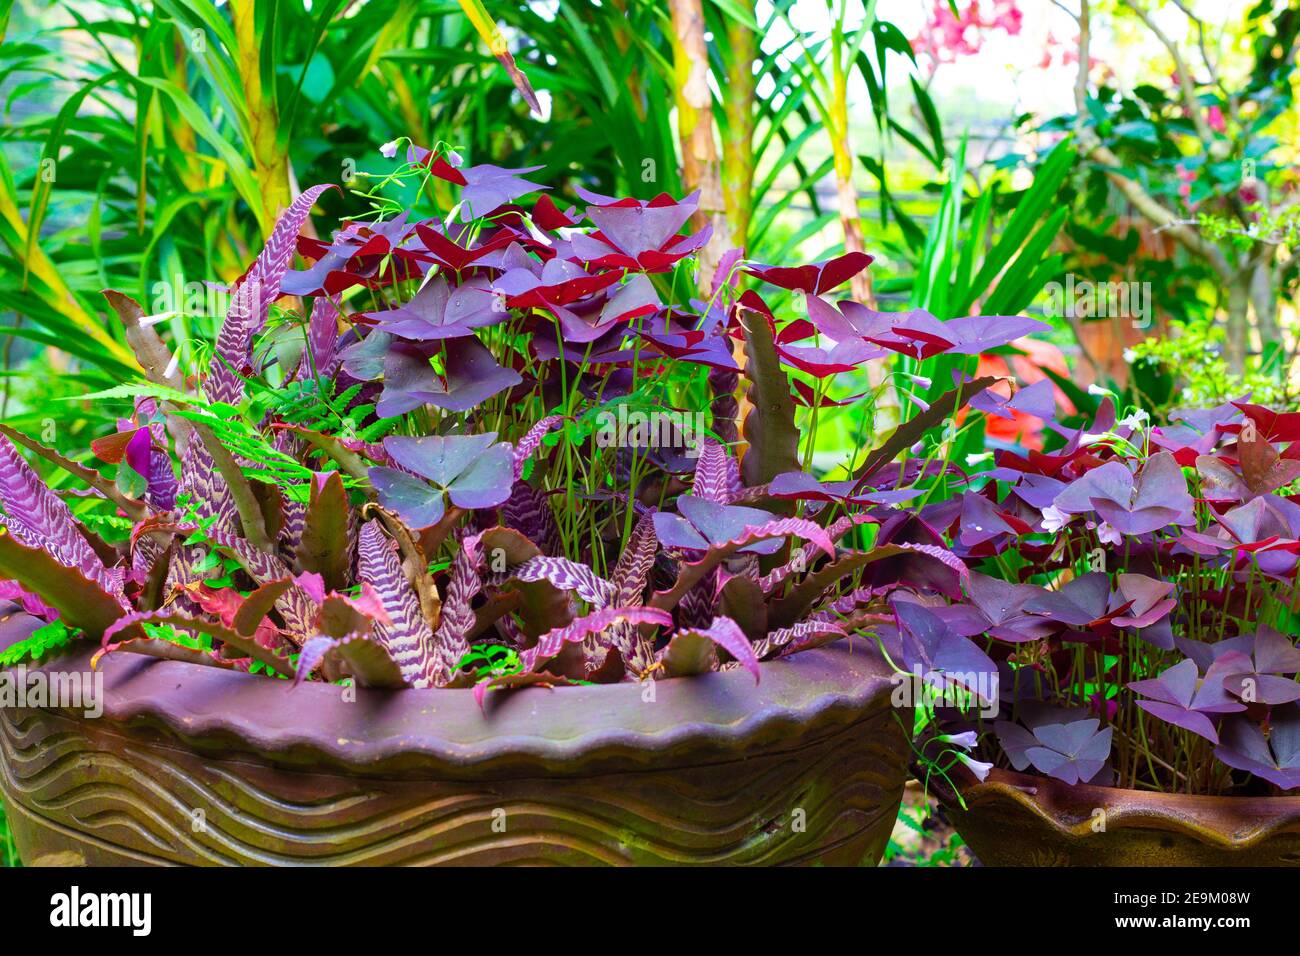 flowering plant acid, oxalis, violet potted, growing outdoors, garden decorations Stock Photo